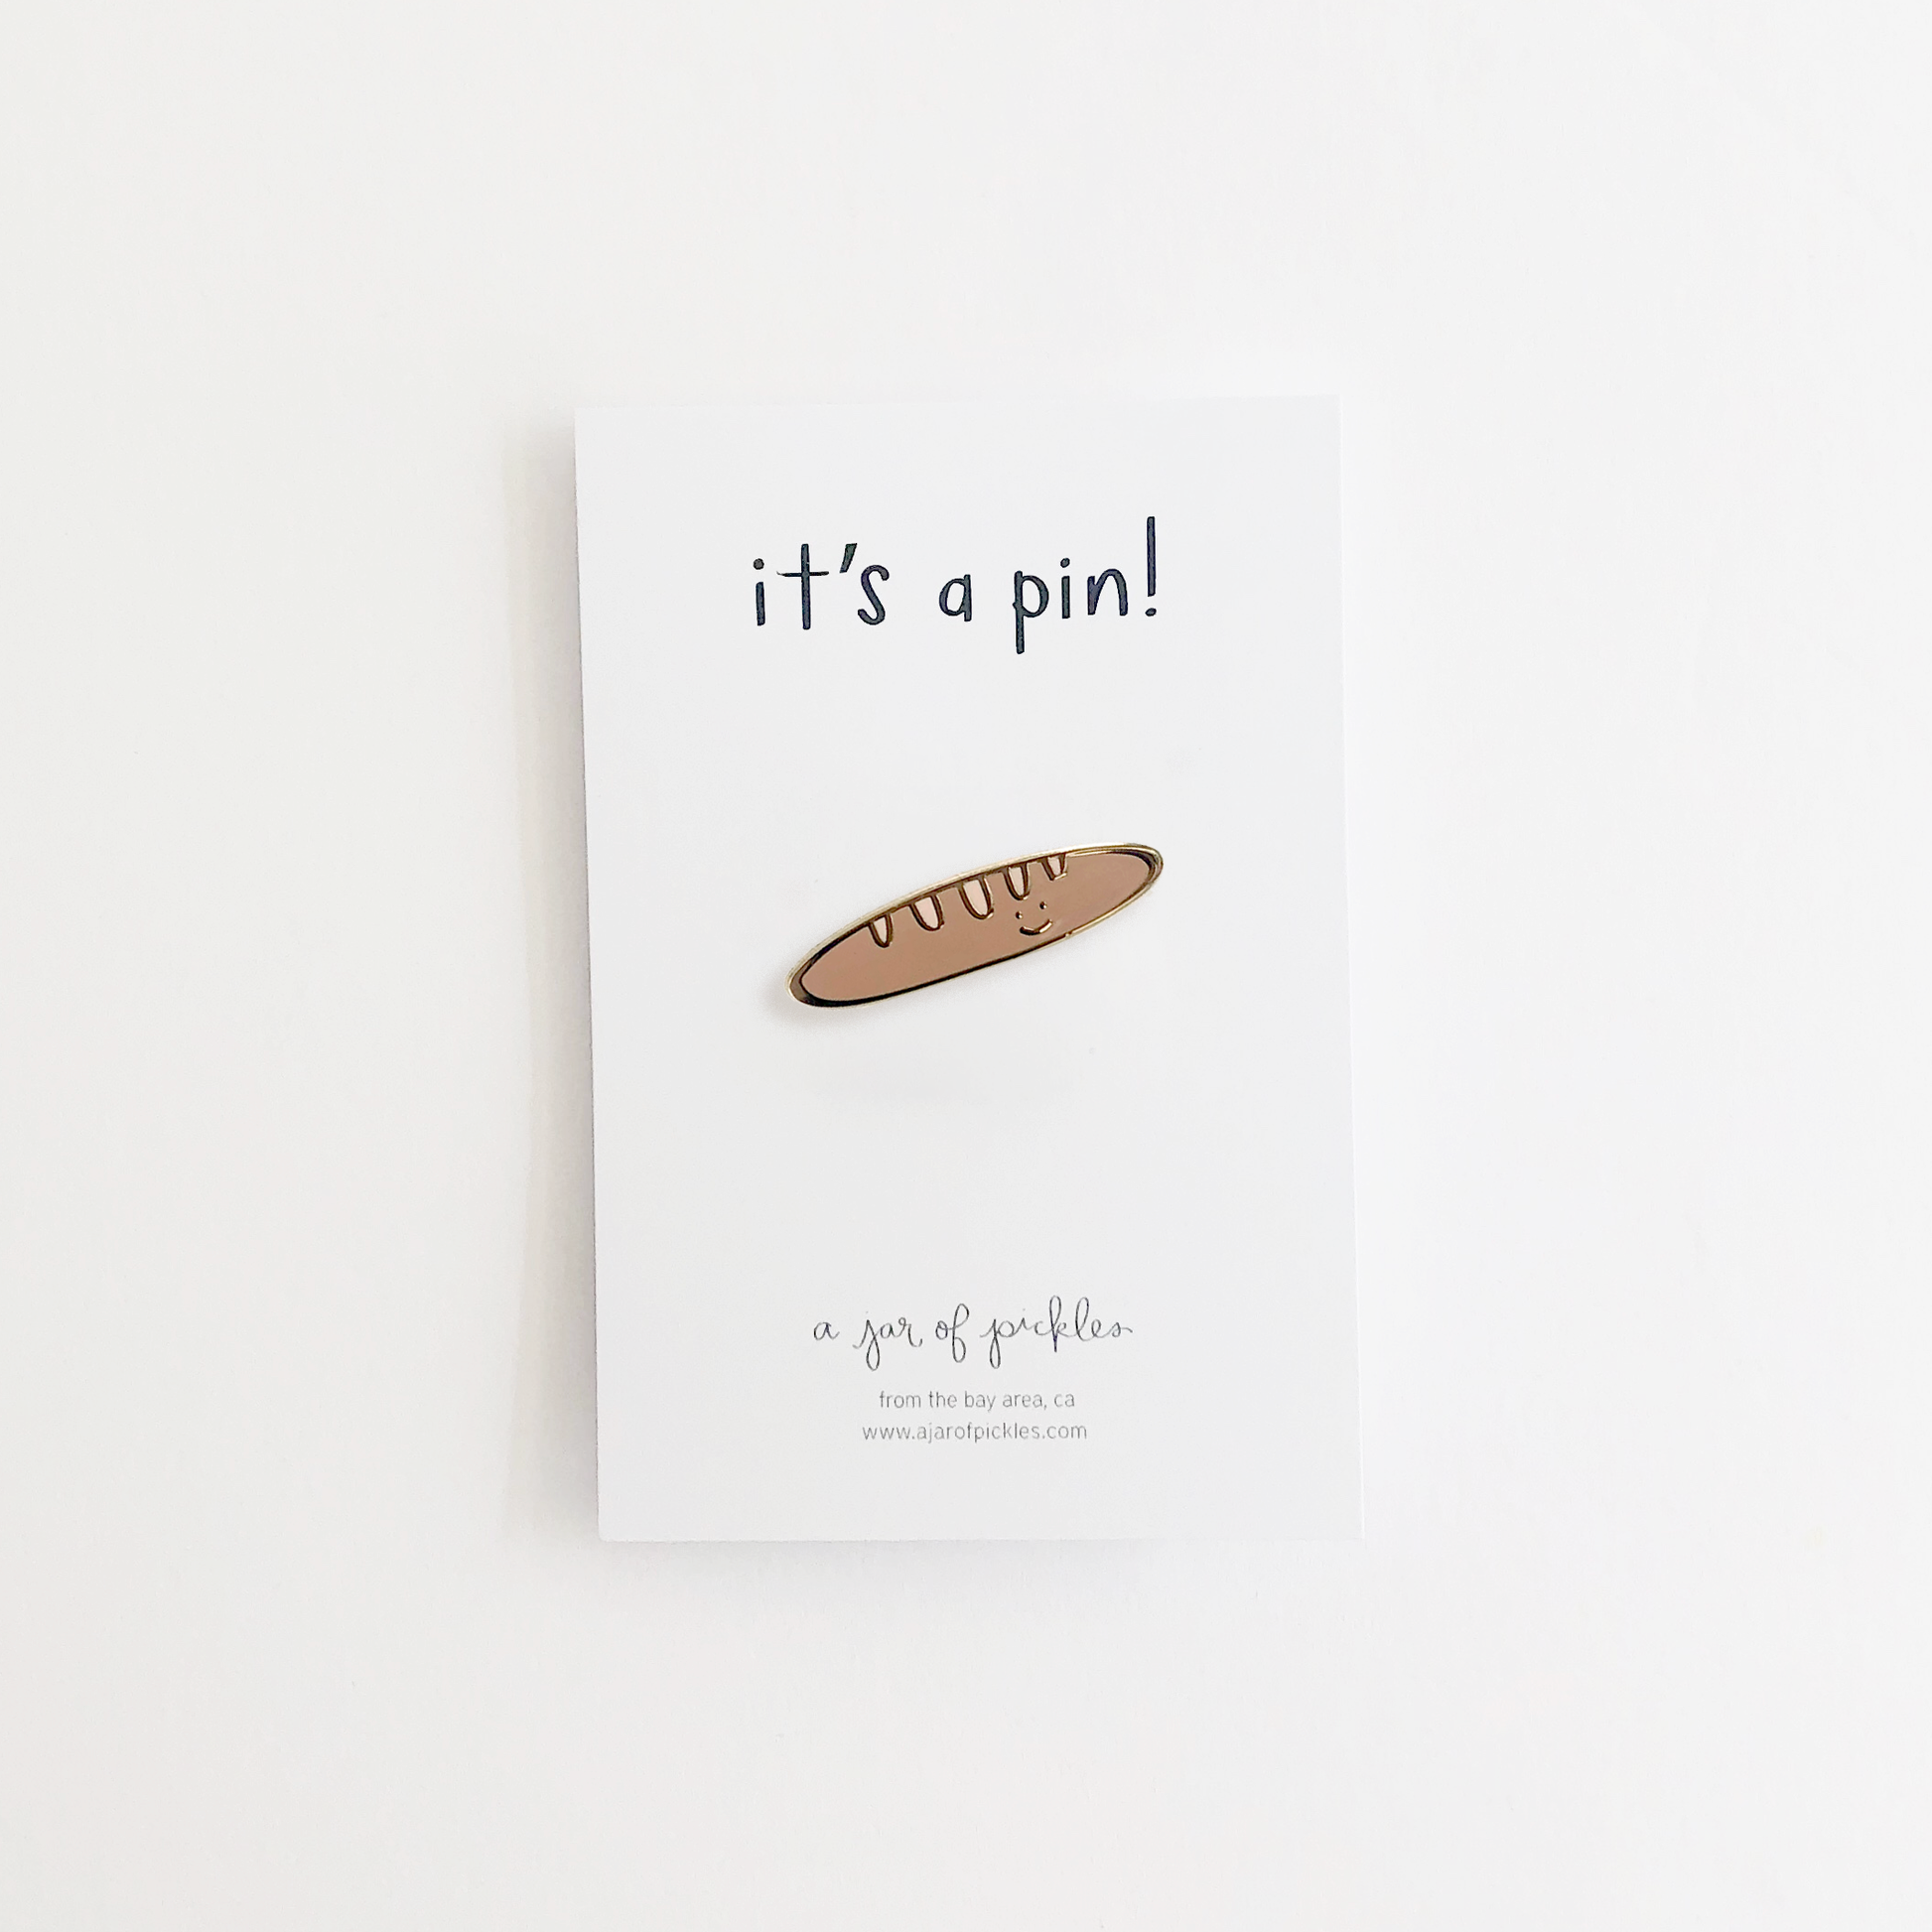 Enamel pin of a baguette with a smiley face, on top of a white card backing that says "it's a pin!"